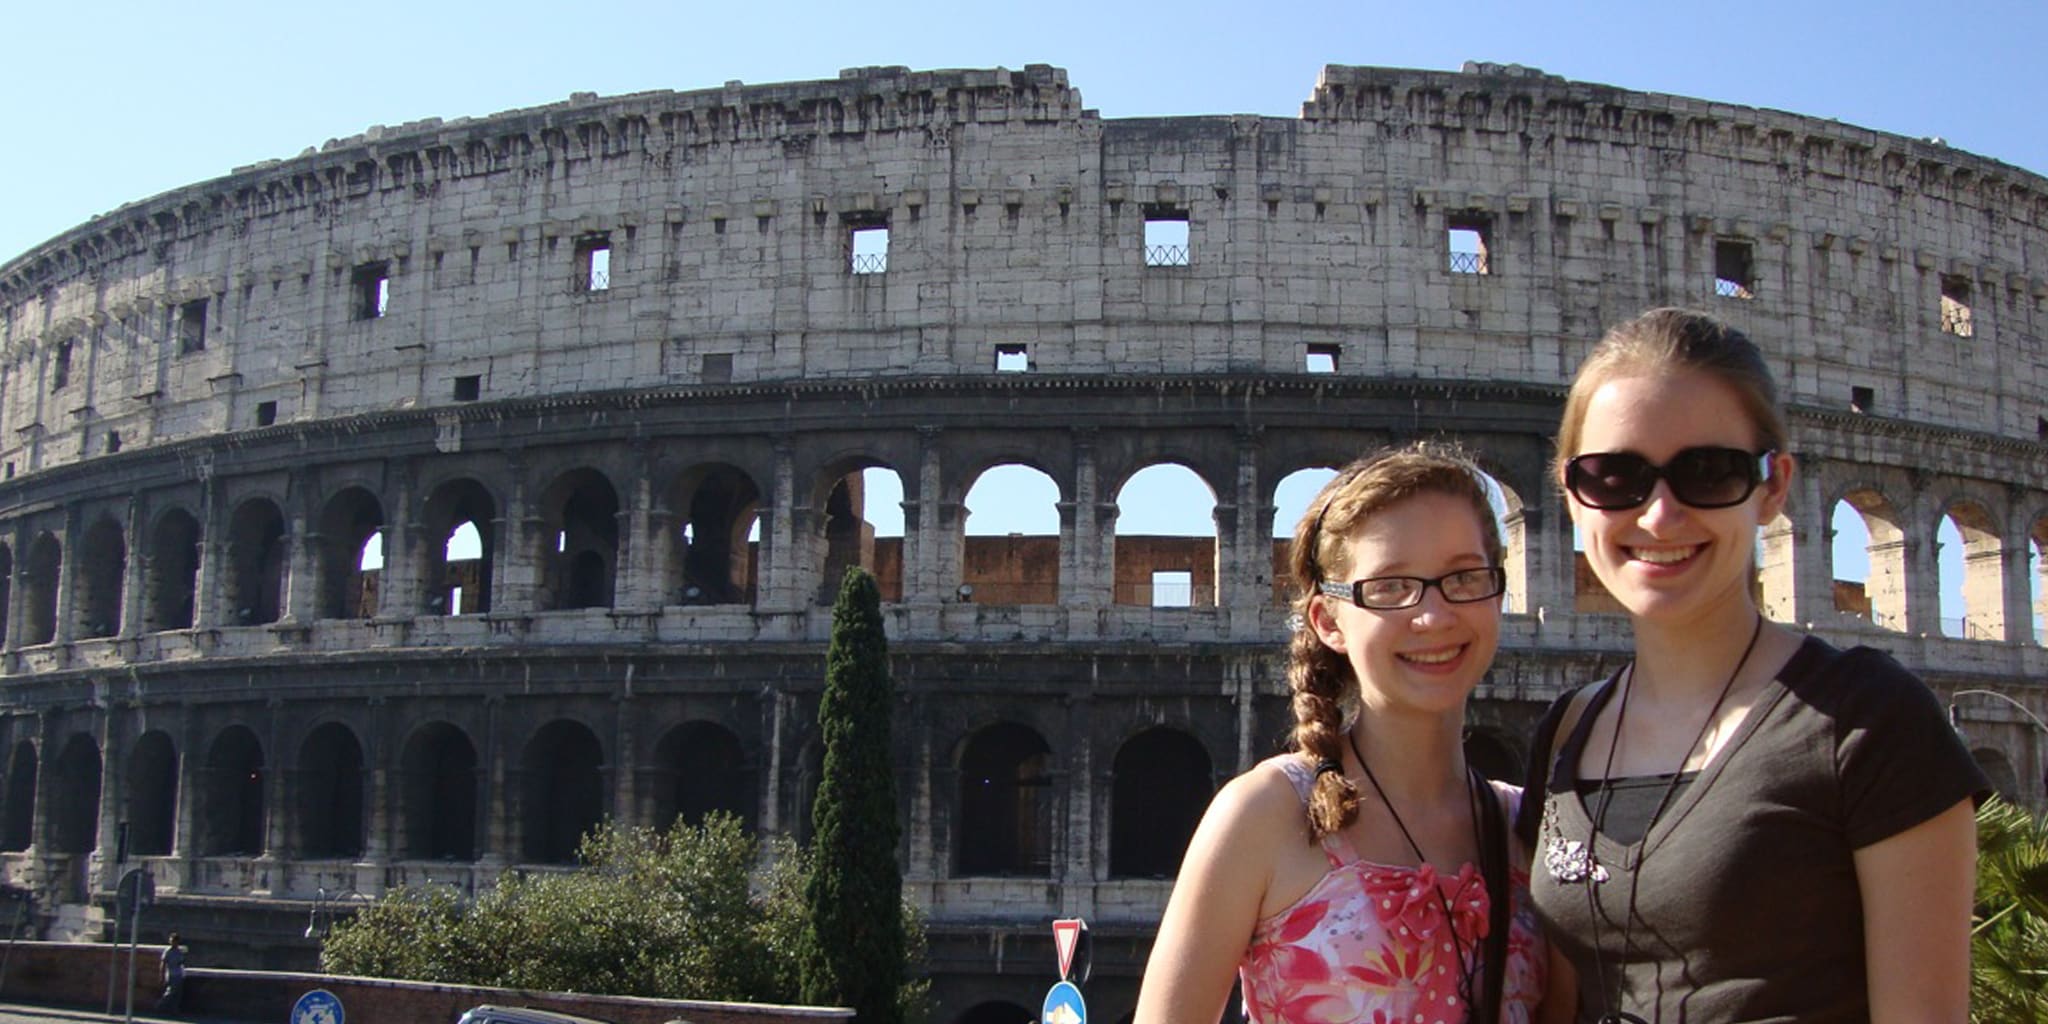 Mary Westerman and daughter pose for a picture in front of the Colosseum